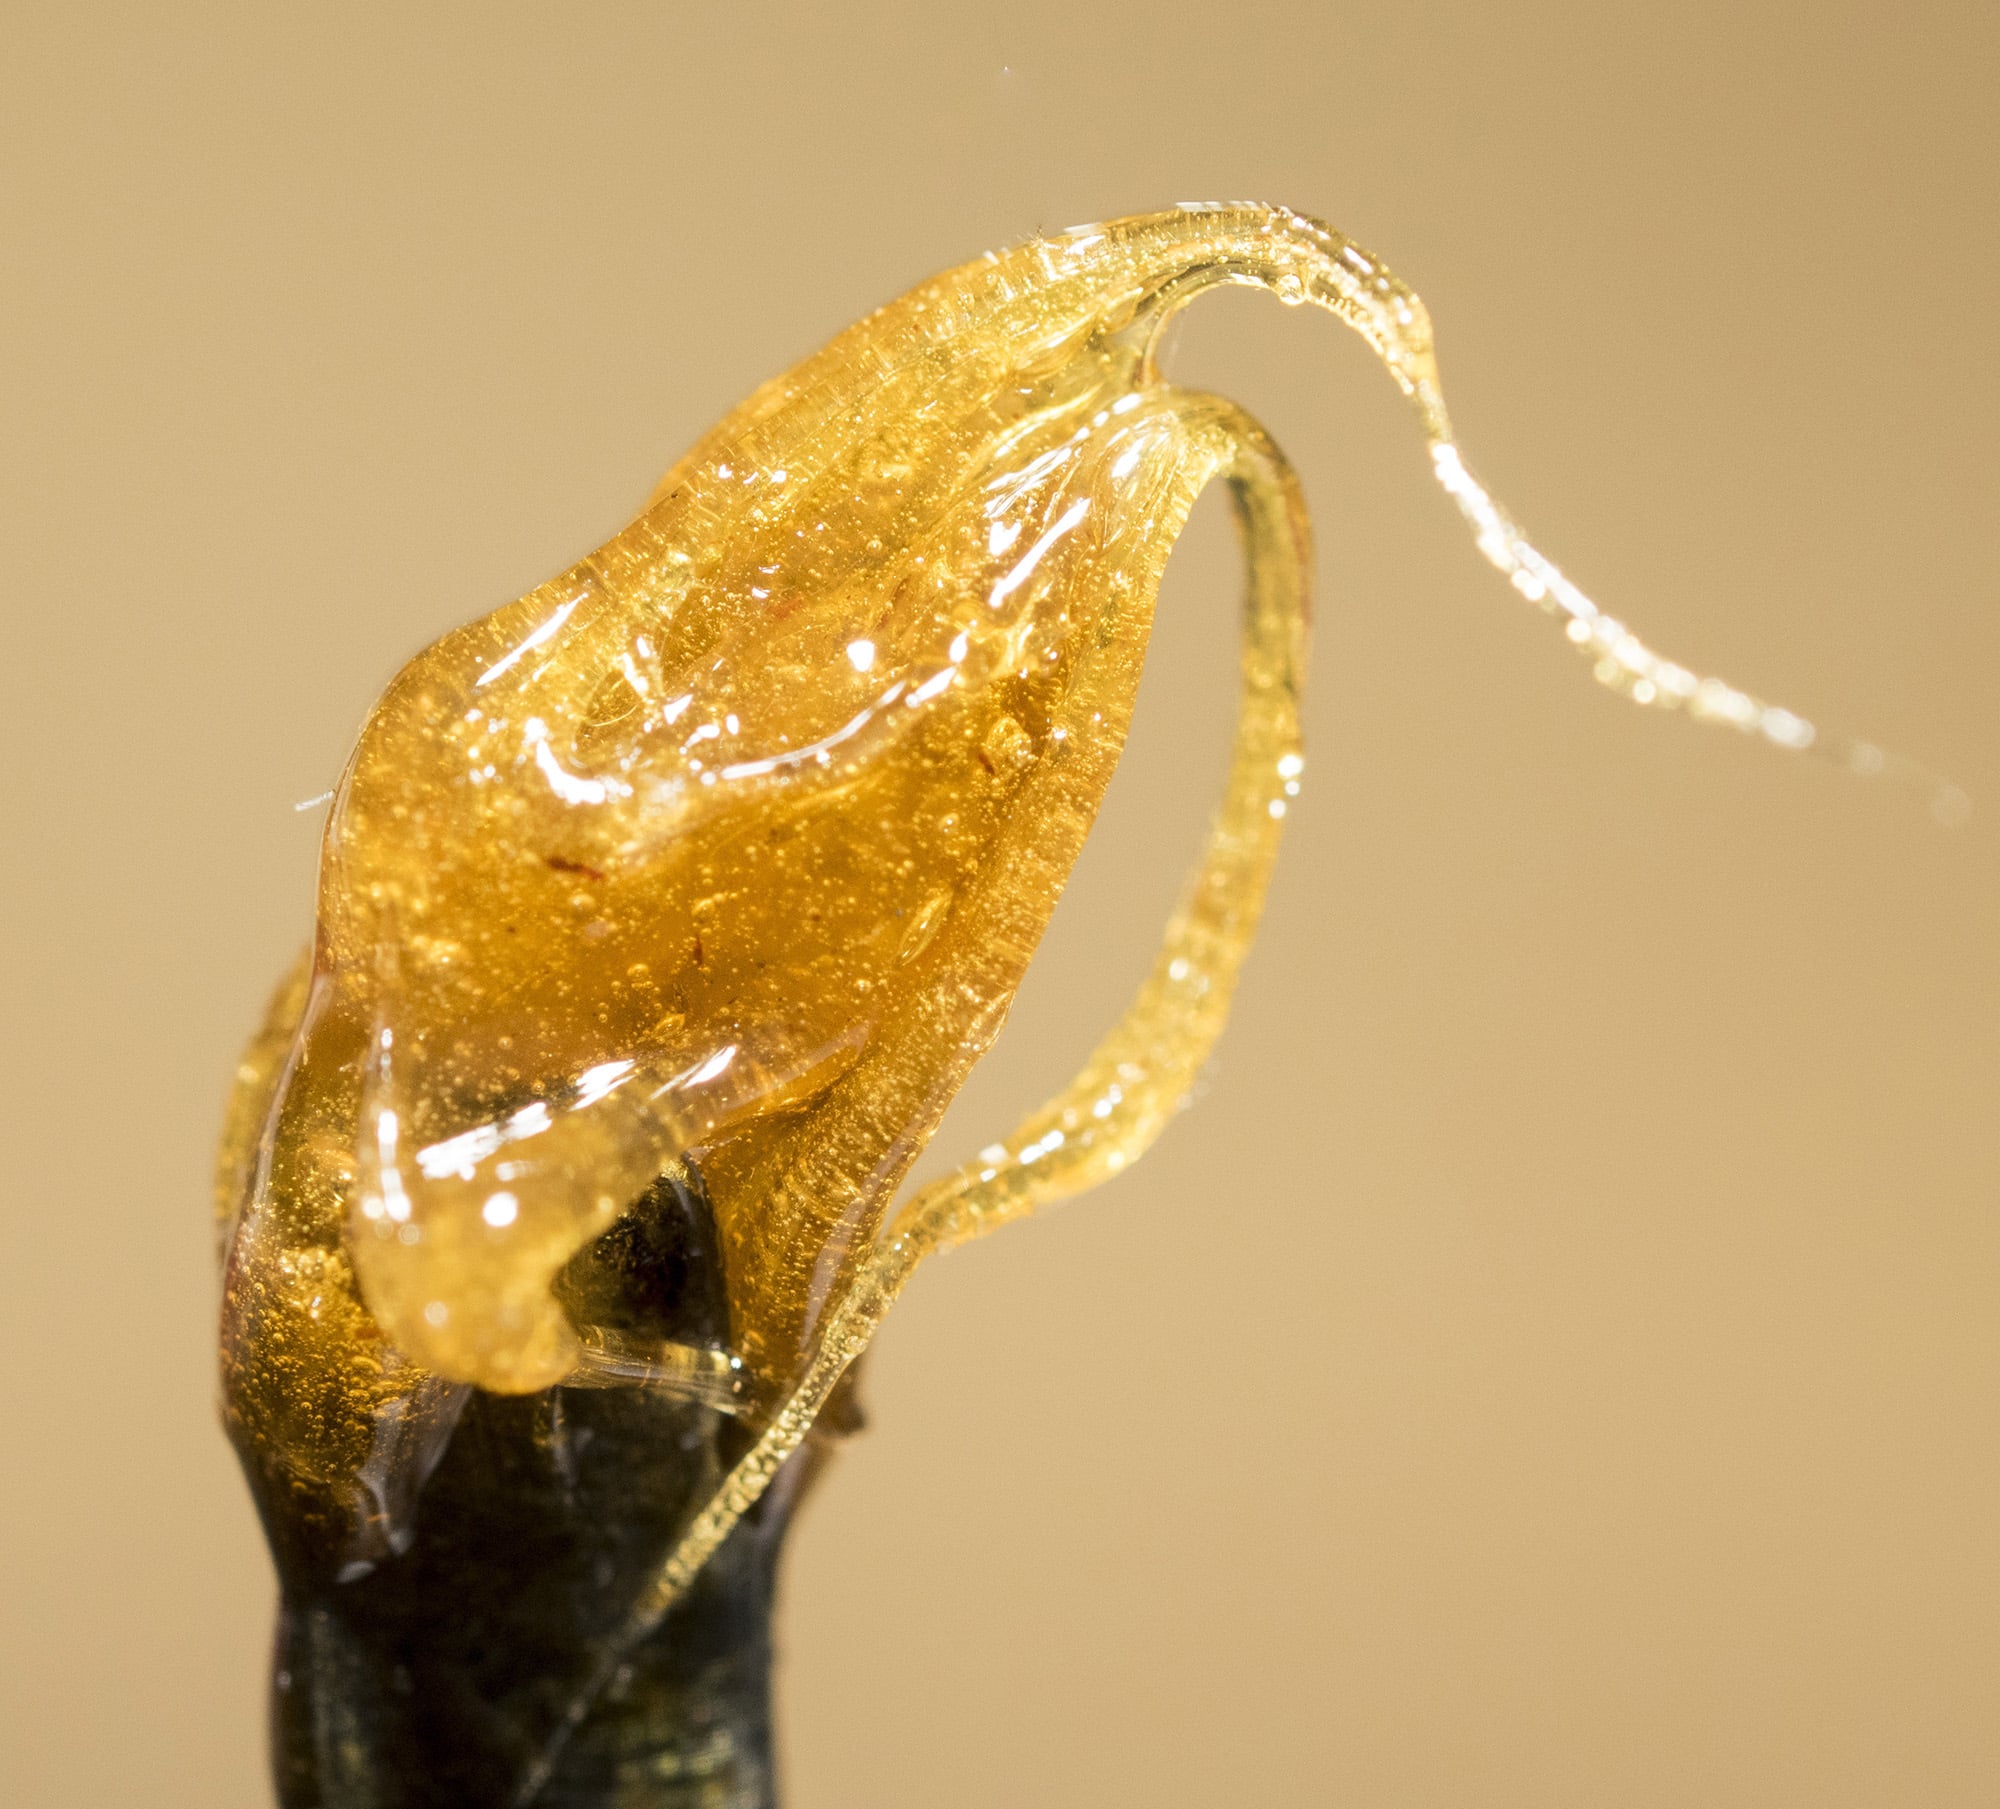 rosin concentrate